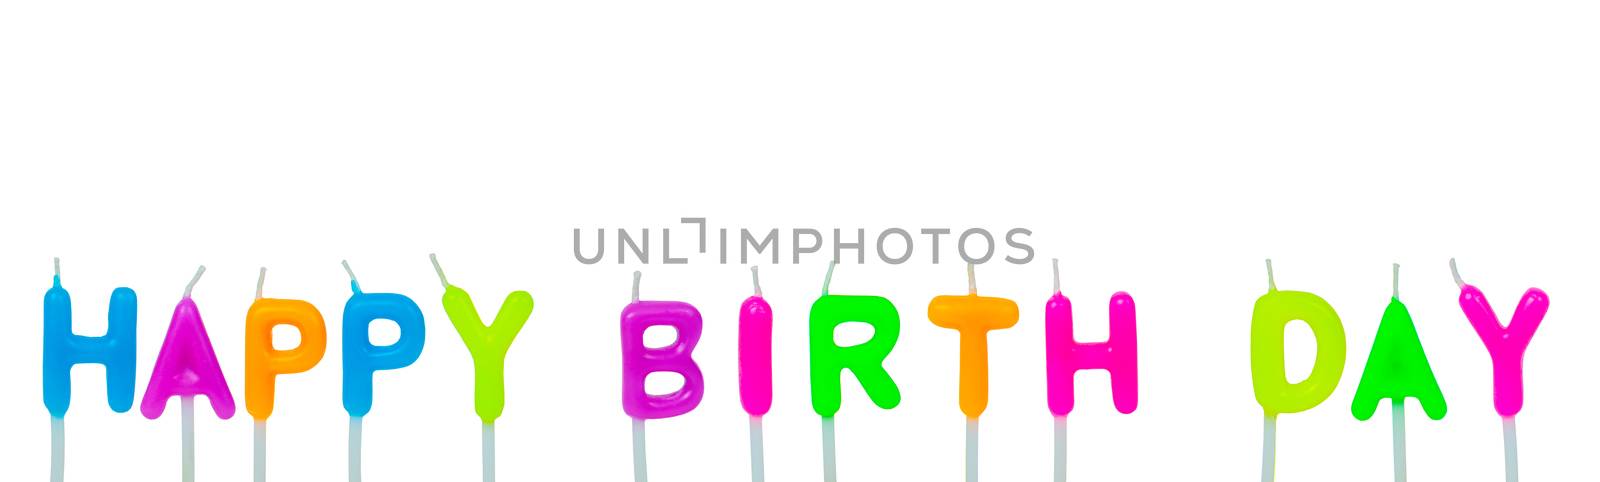 Colorful happy birthday candles on white background by FrameAngel